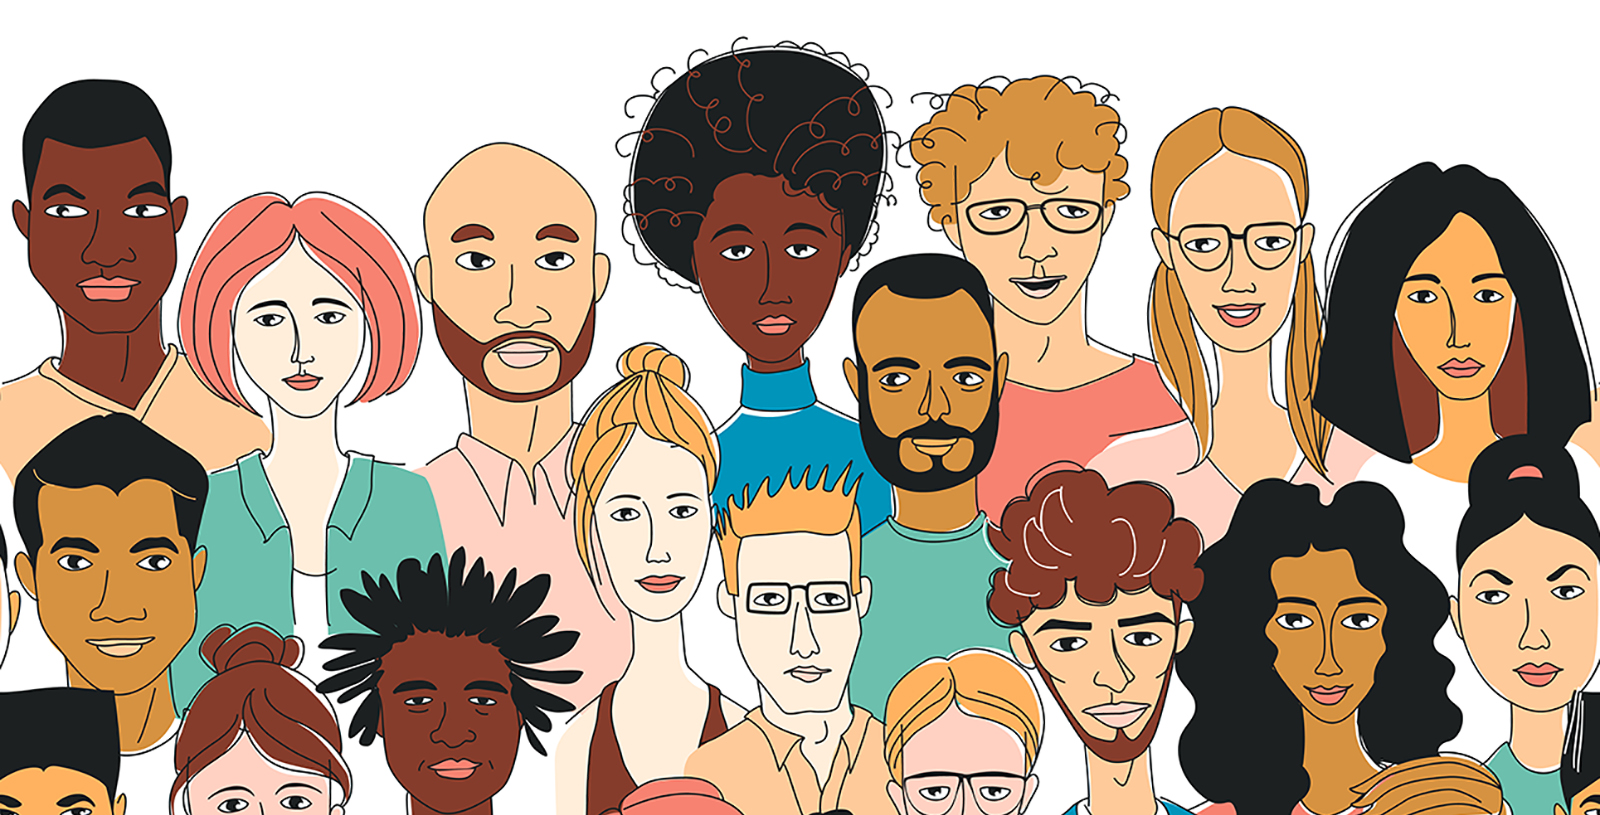 Illustration of students of different ethnic and racial groups, from head to shoulder in a group.